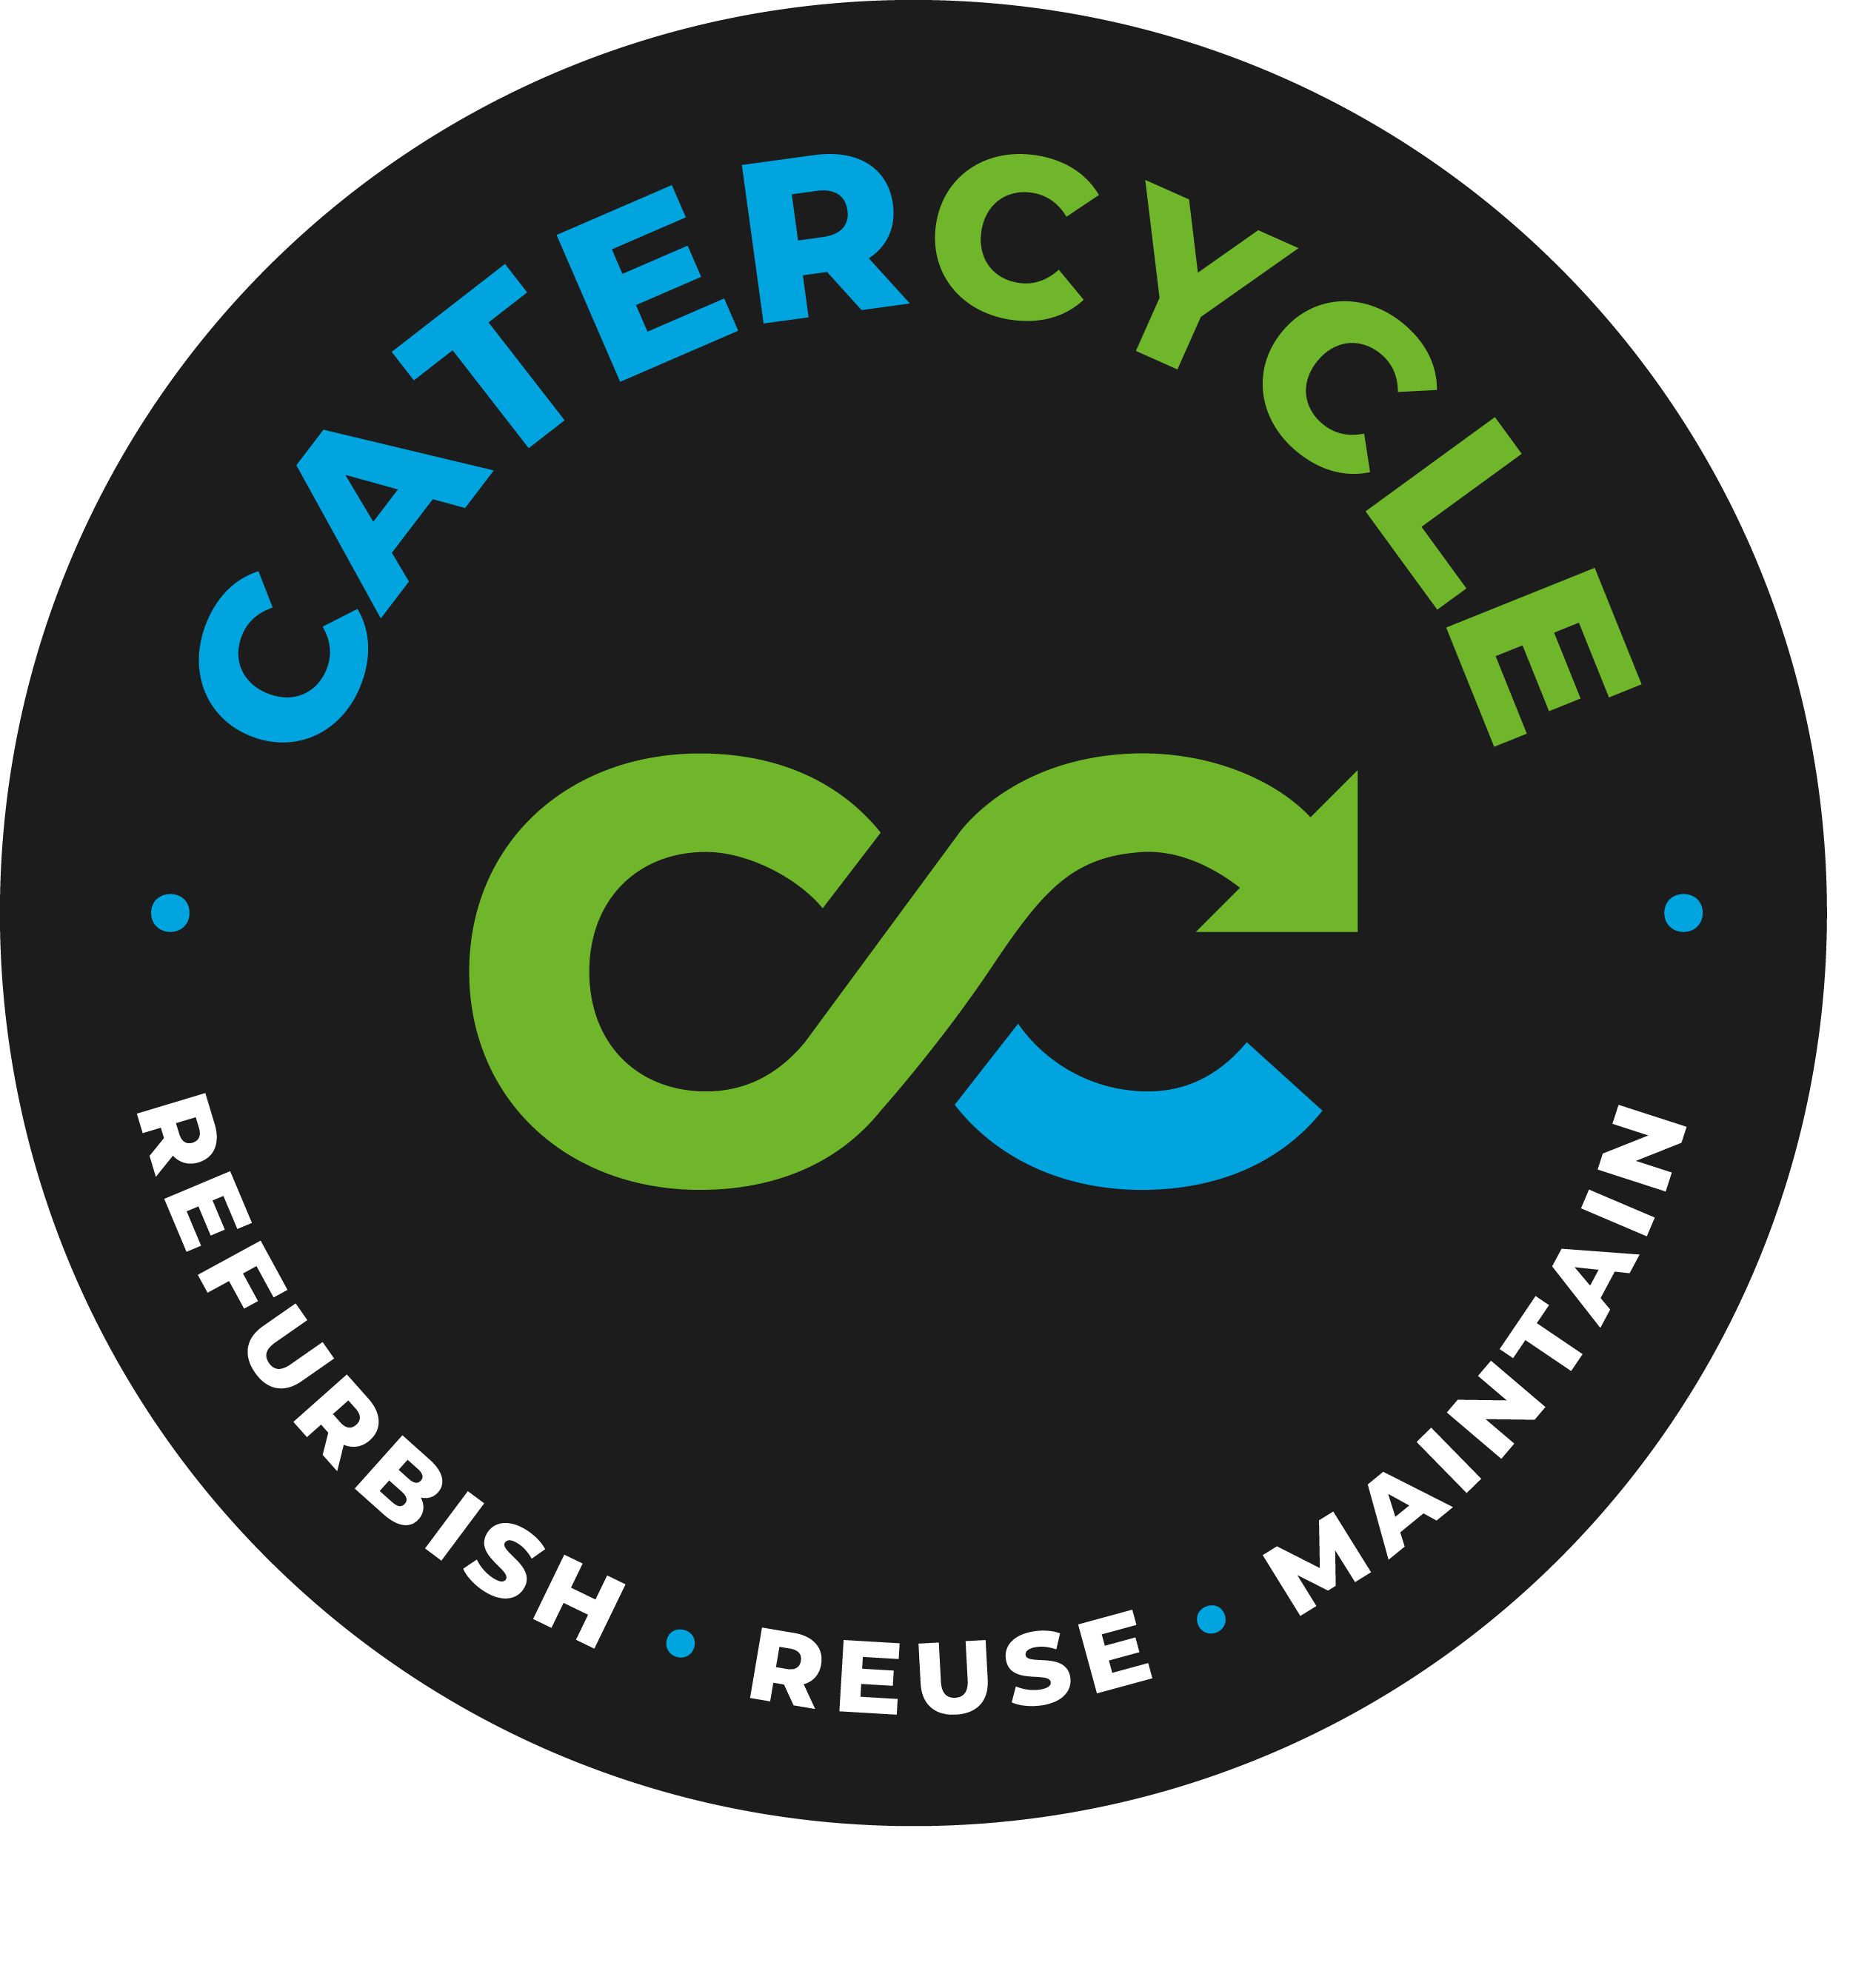 Catercycle